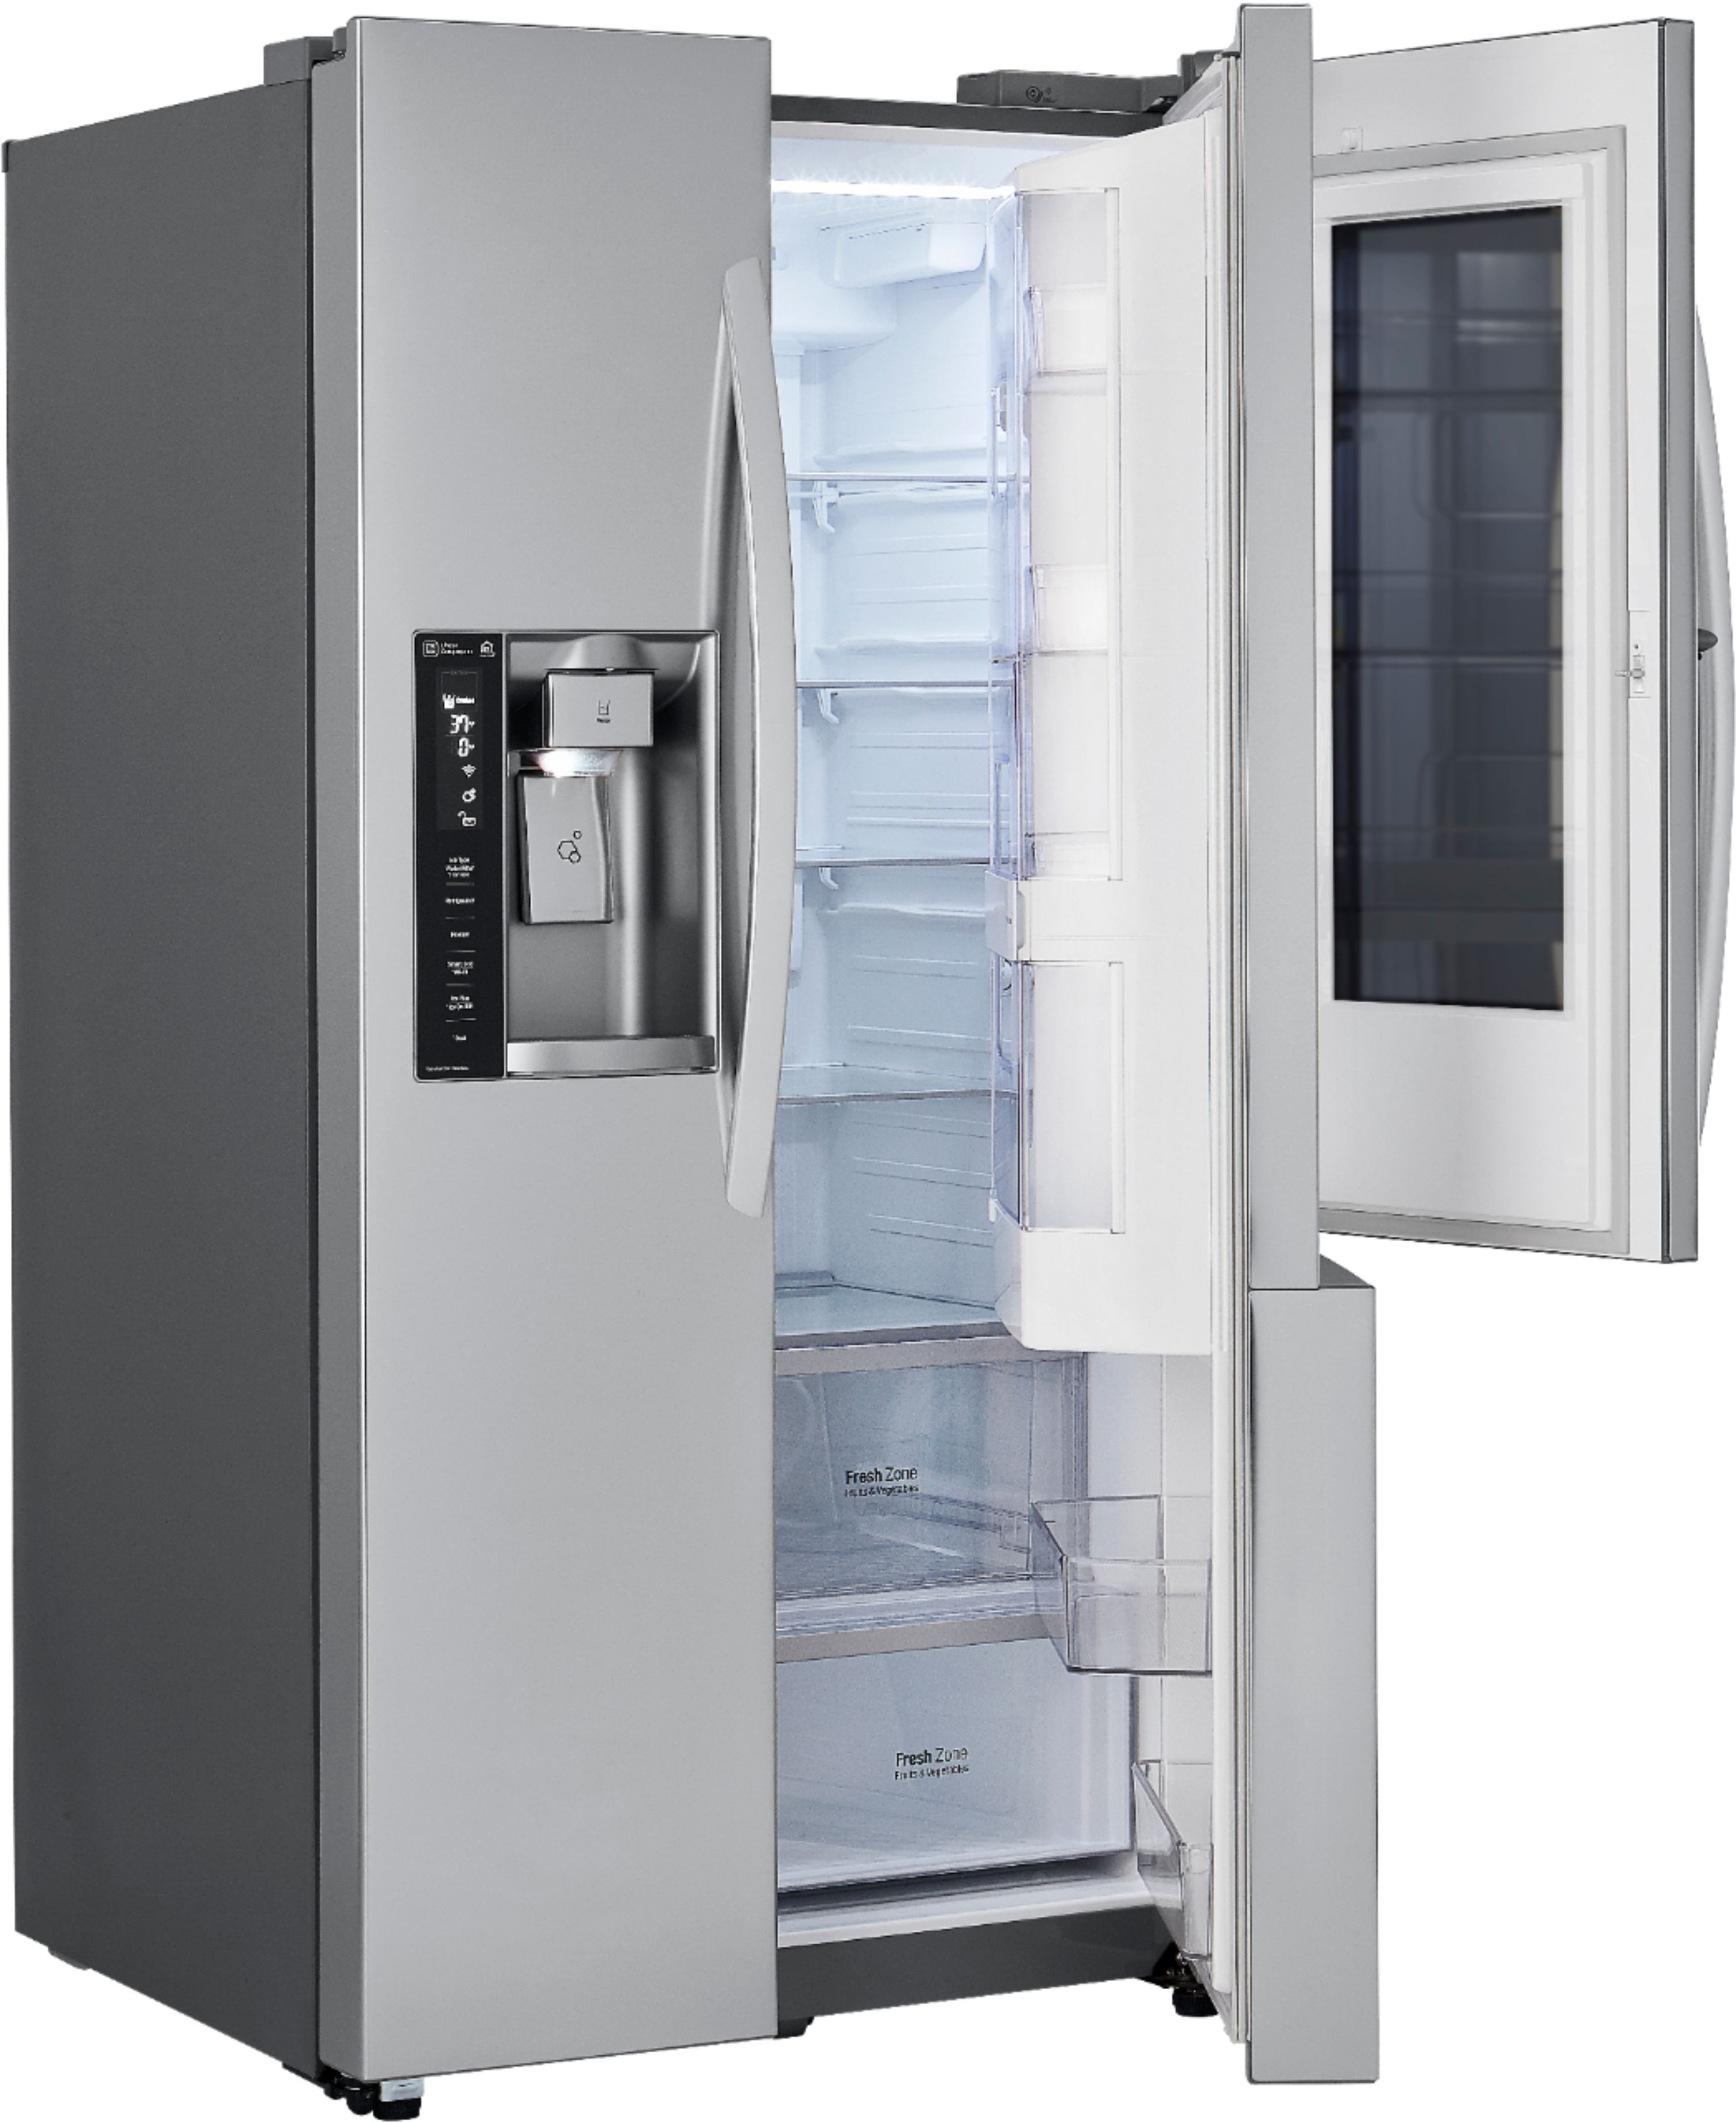 LG Refrigerator Reviews + Our Top 5 Picks, East Coast Appliance